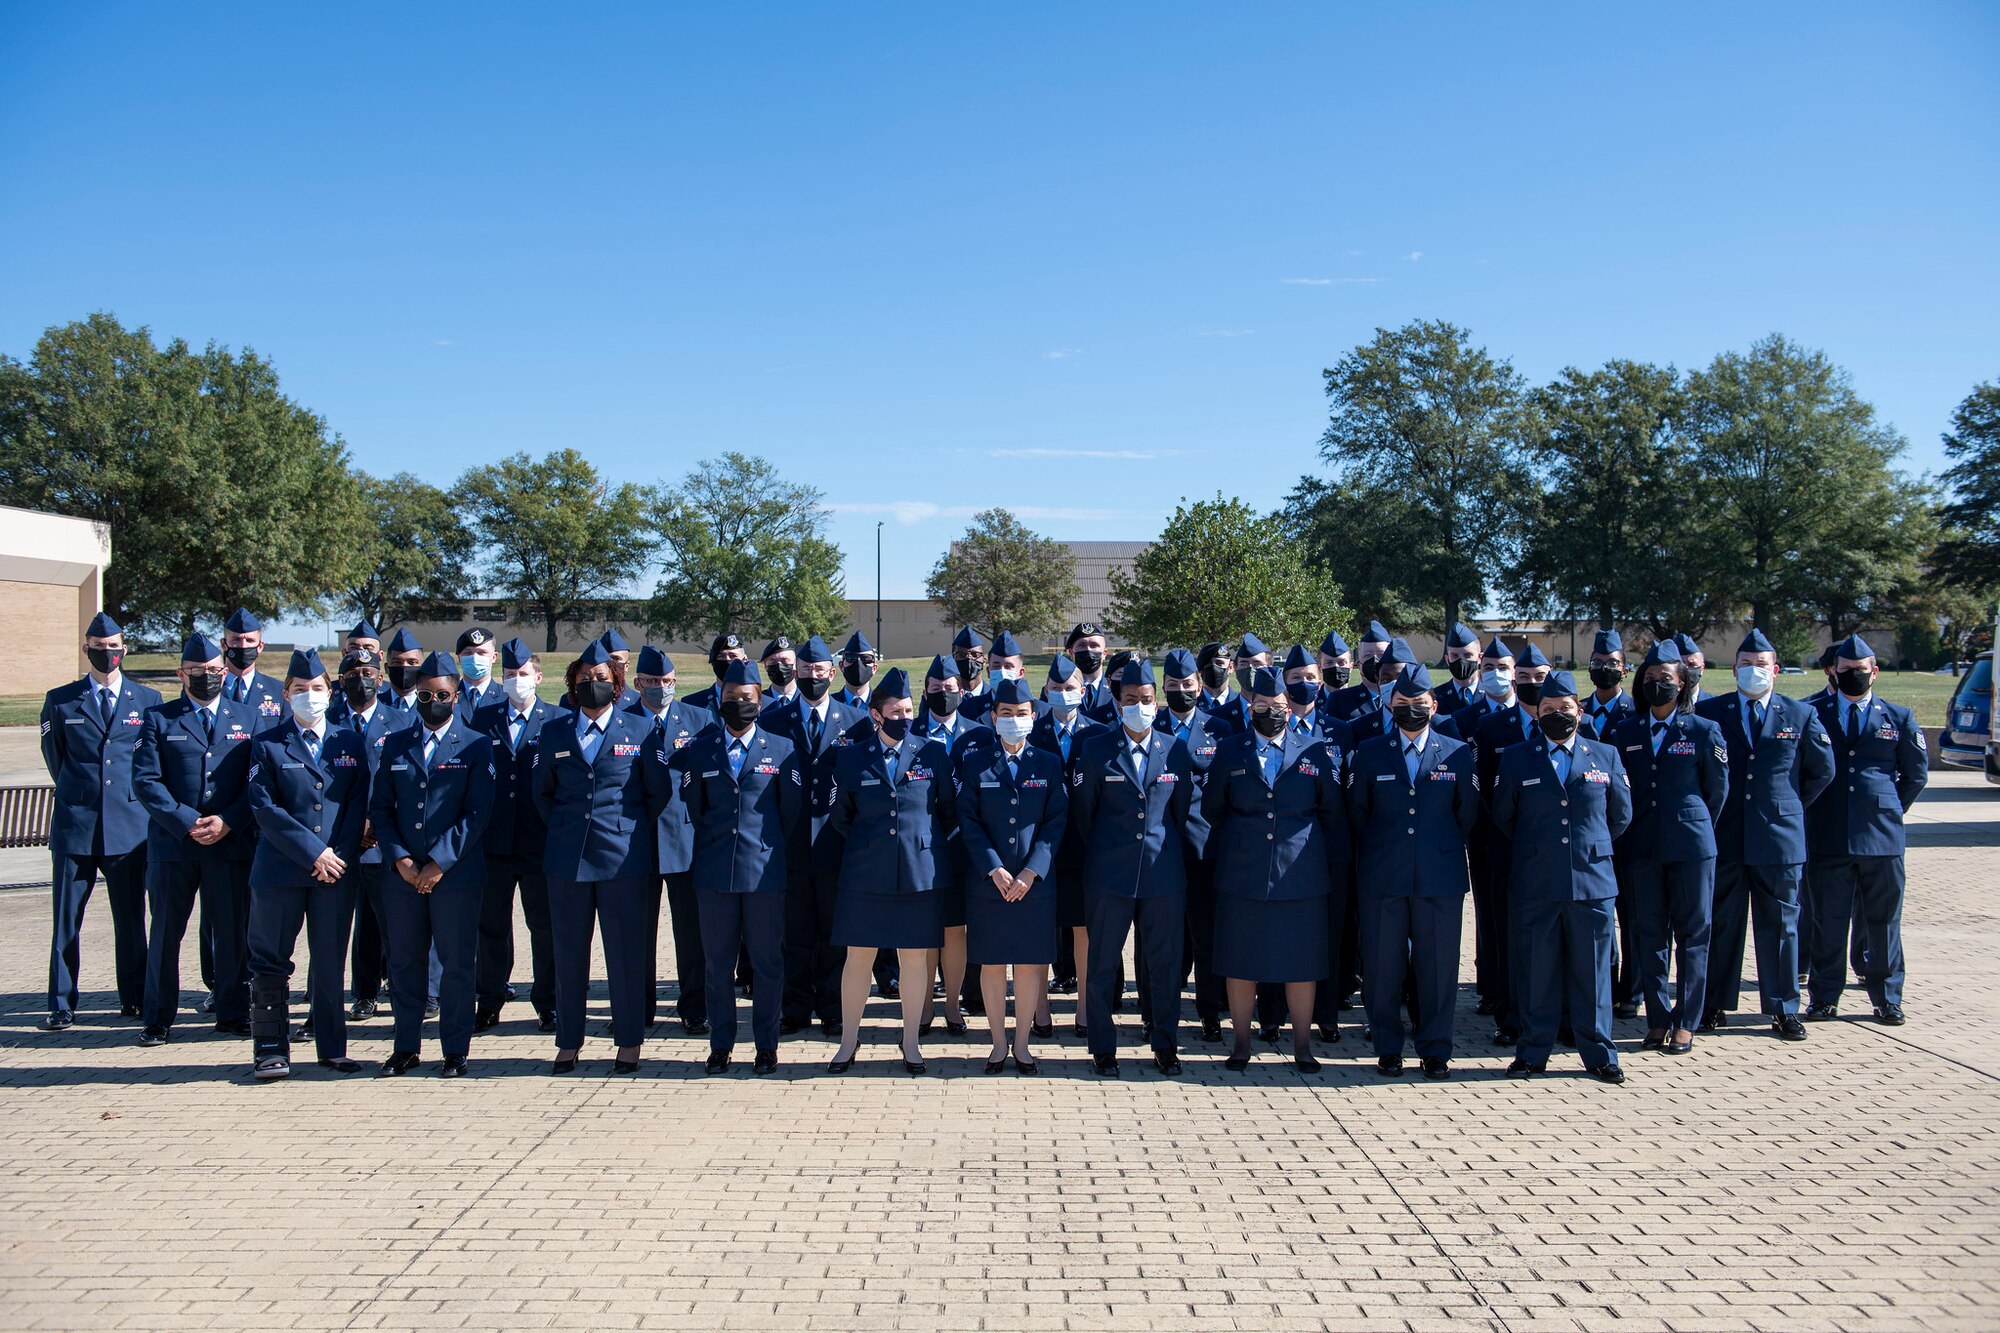 459th ARW NCOs graduate from CCAF
Master Sgt. Maria Clark of the 459th Aerospace Medicine Squadron and Master Sgt. Mary Ly of the 459th Maintenance Group graduated from the Community College of the Air Force during its ceremony held at the Joint Base Andrews theater on Oct. 21, 2021.